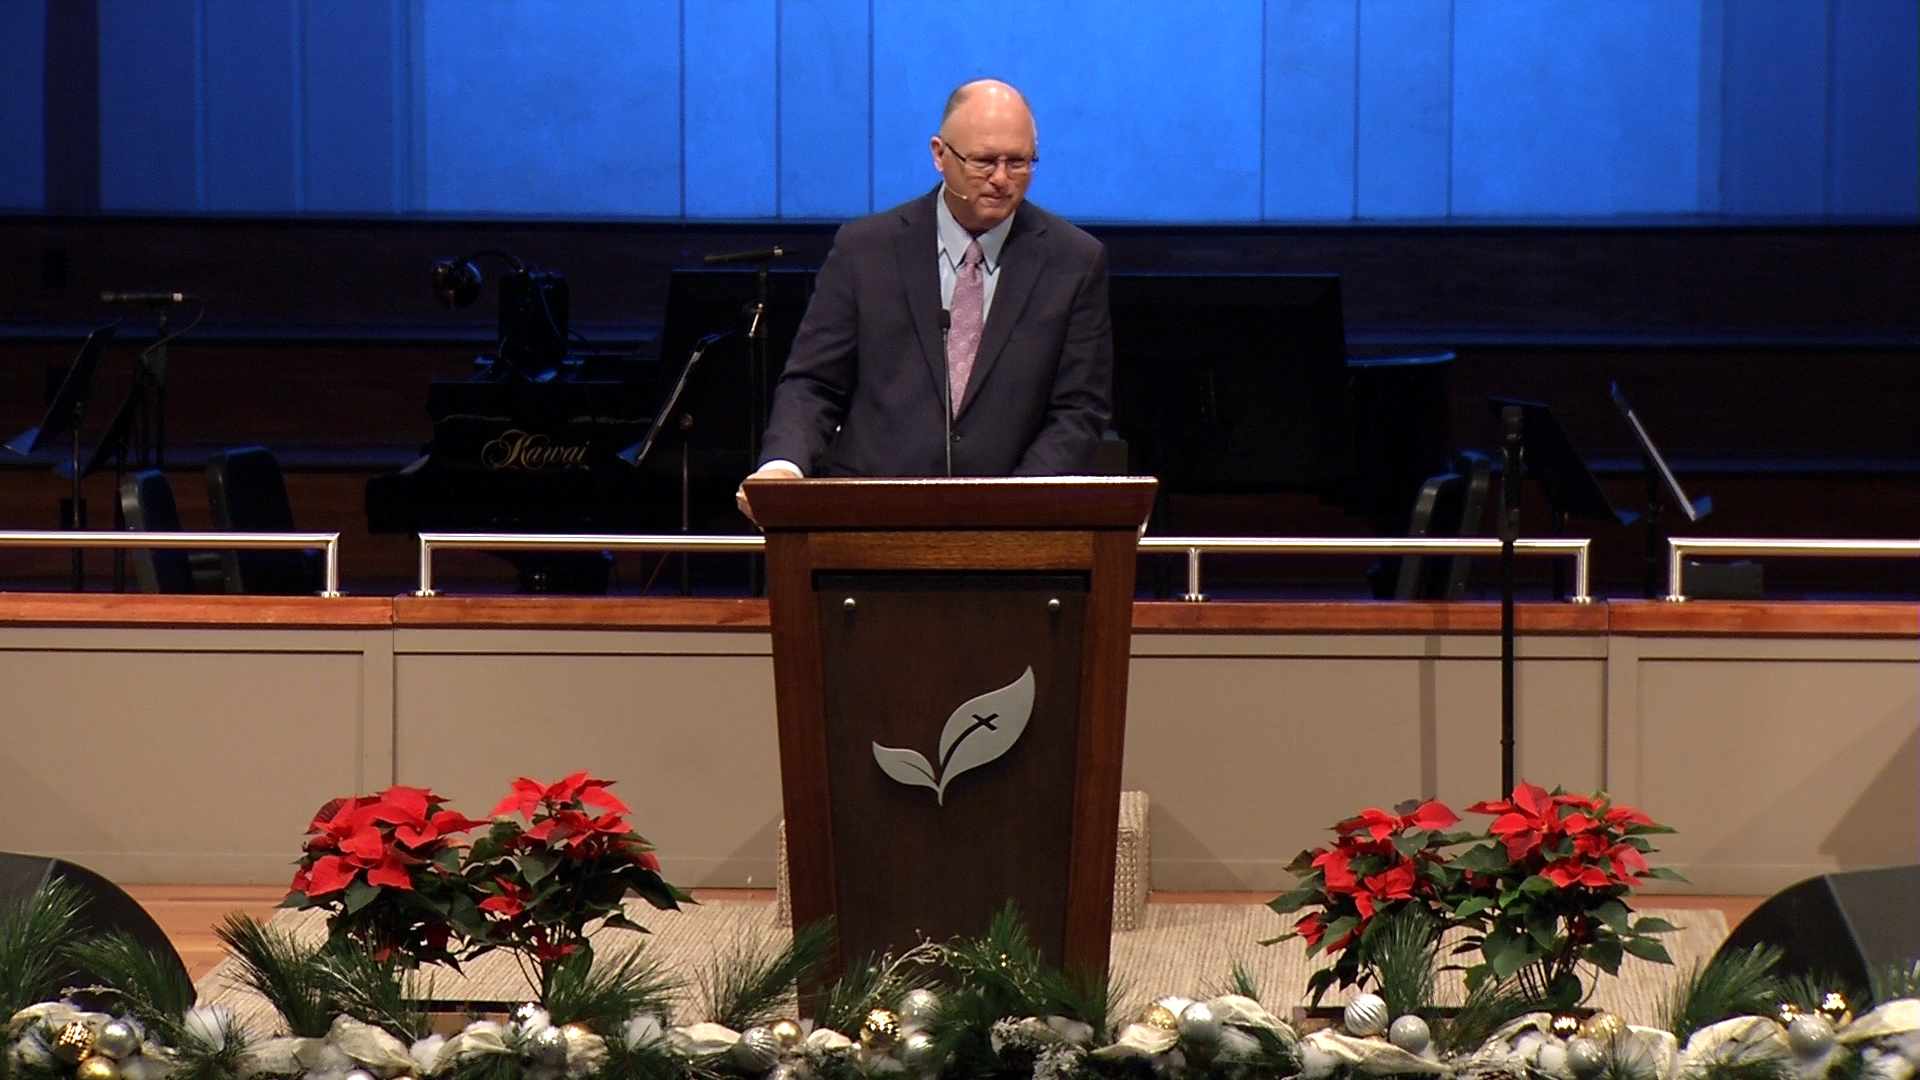 Pastor Paul Chappell: The Amazement of the Incarnation